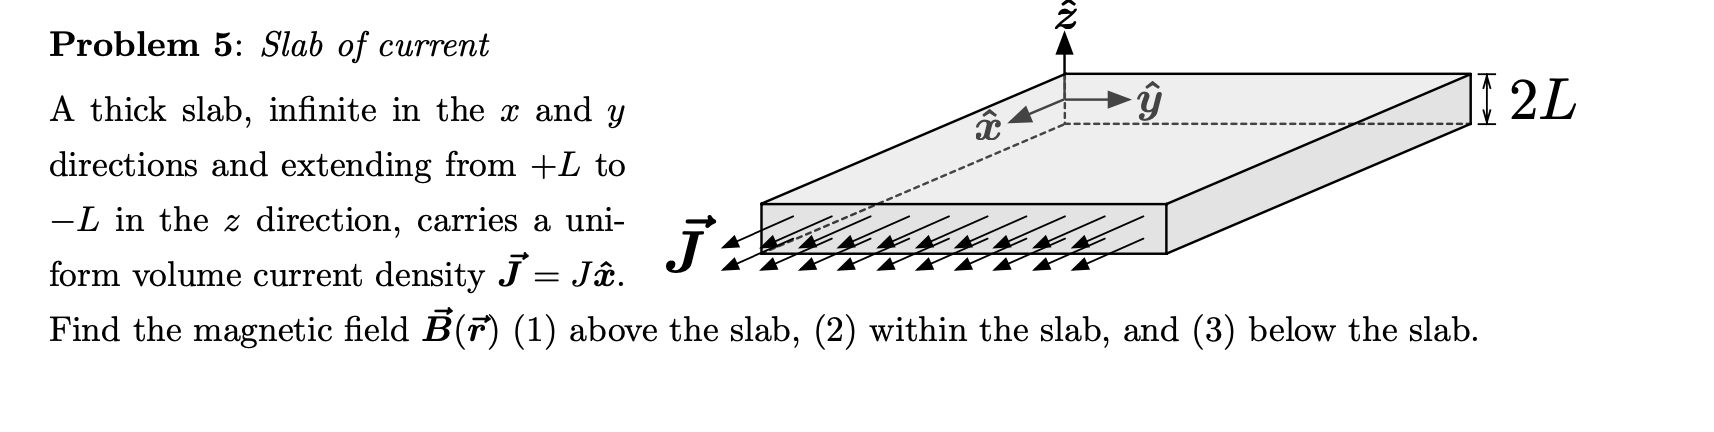 Solved 4. Consider an infinite slab (extending in y and x